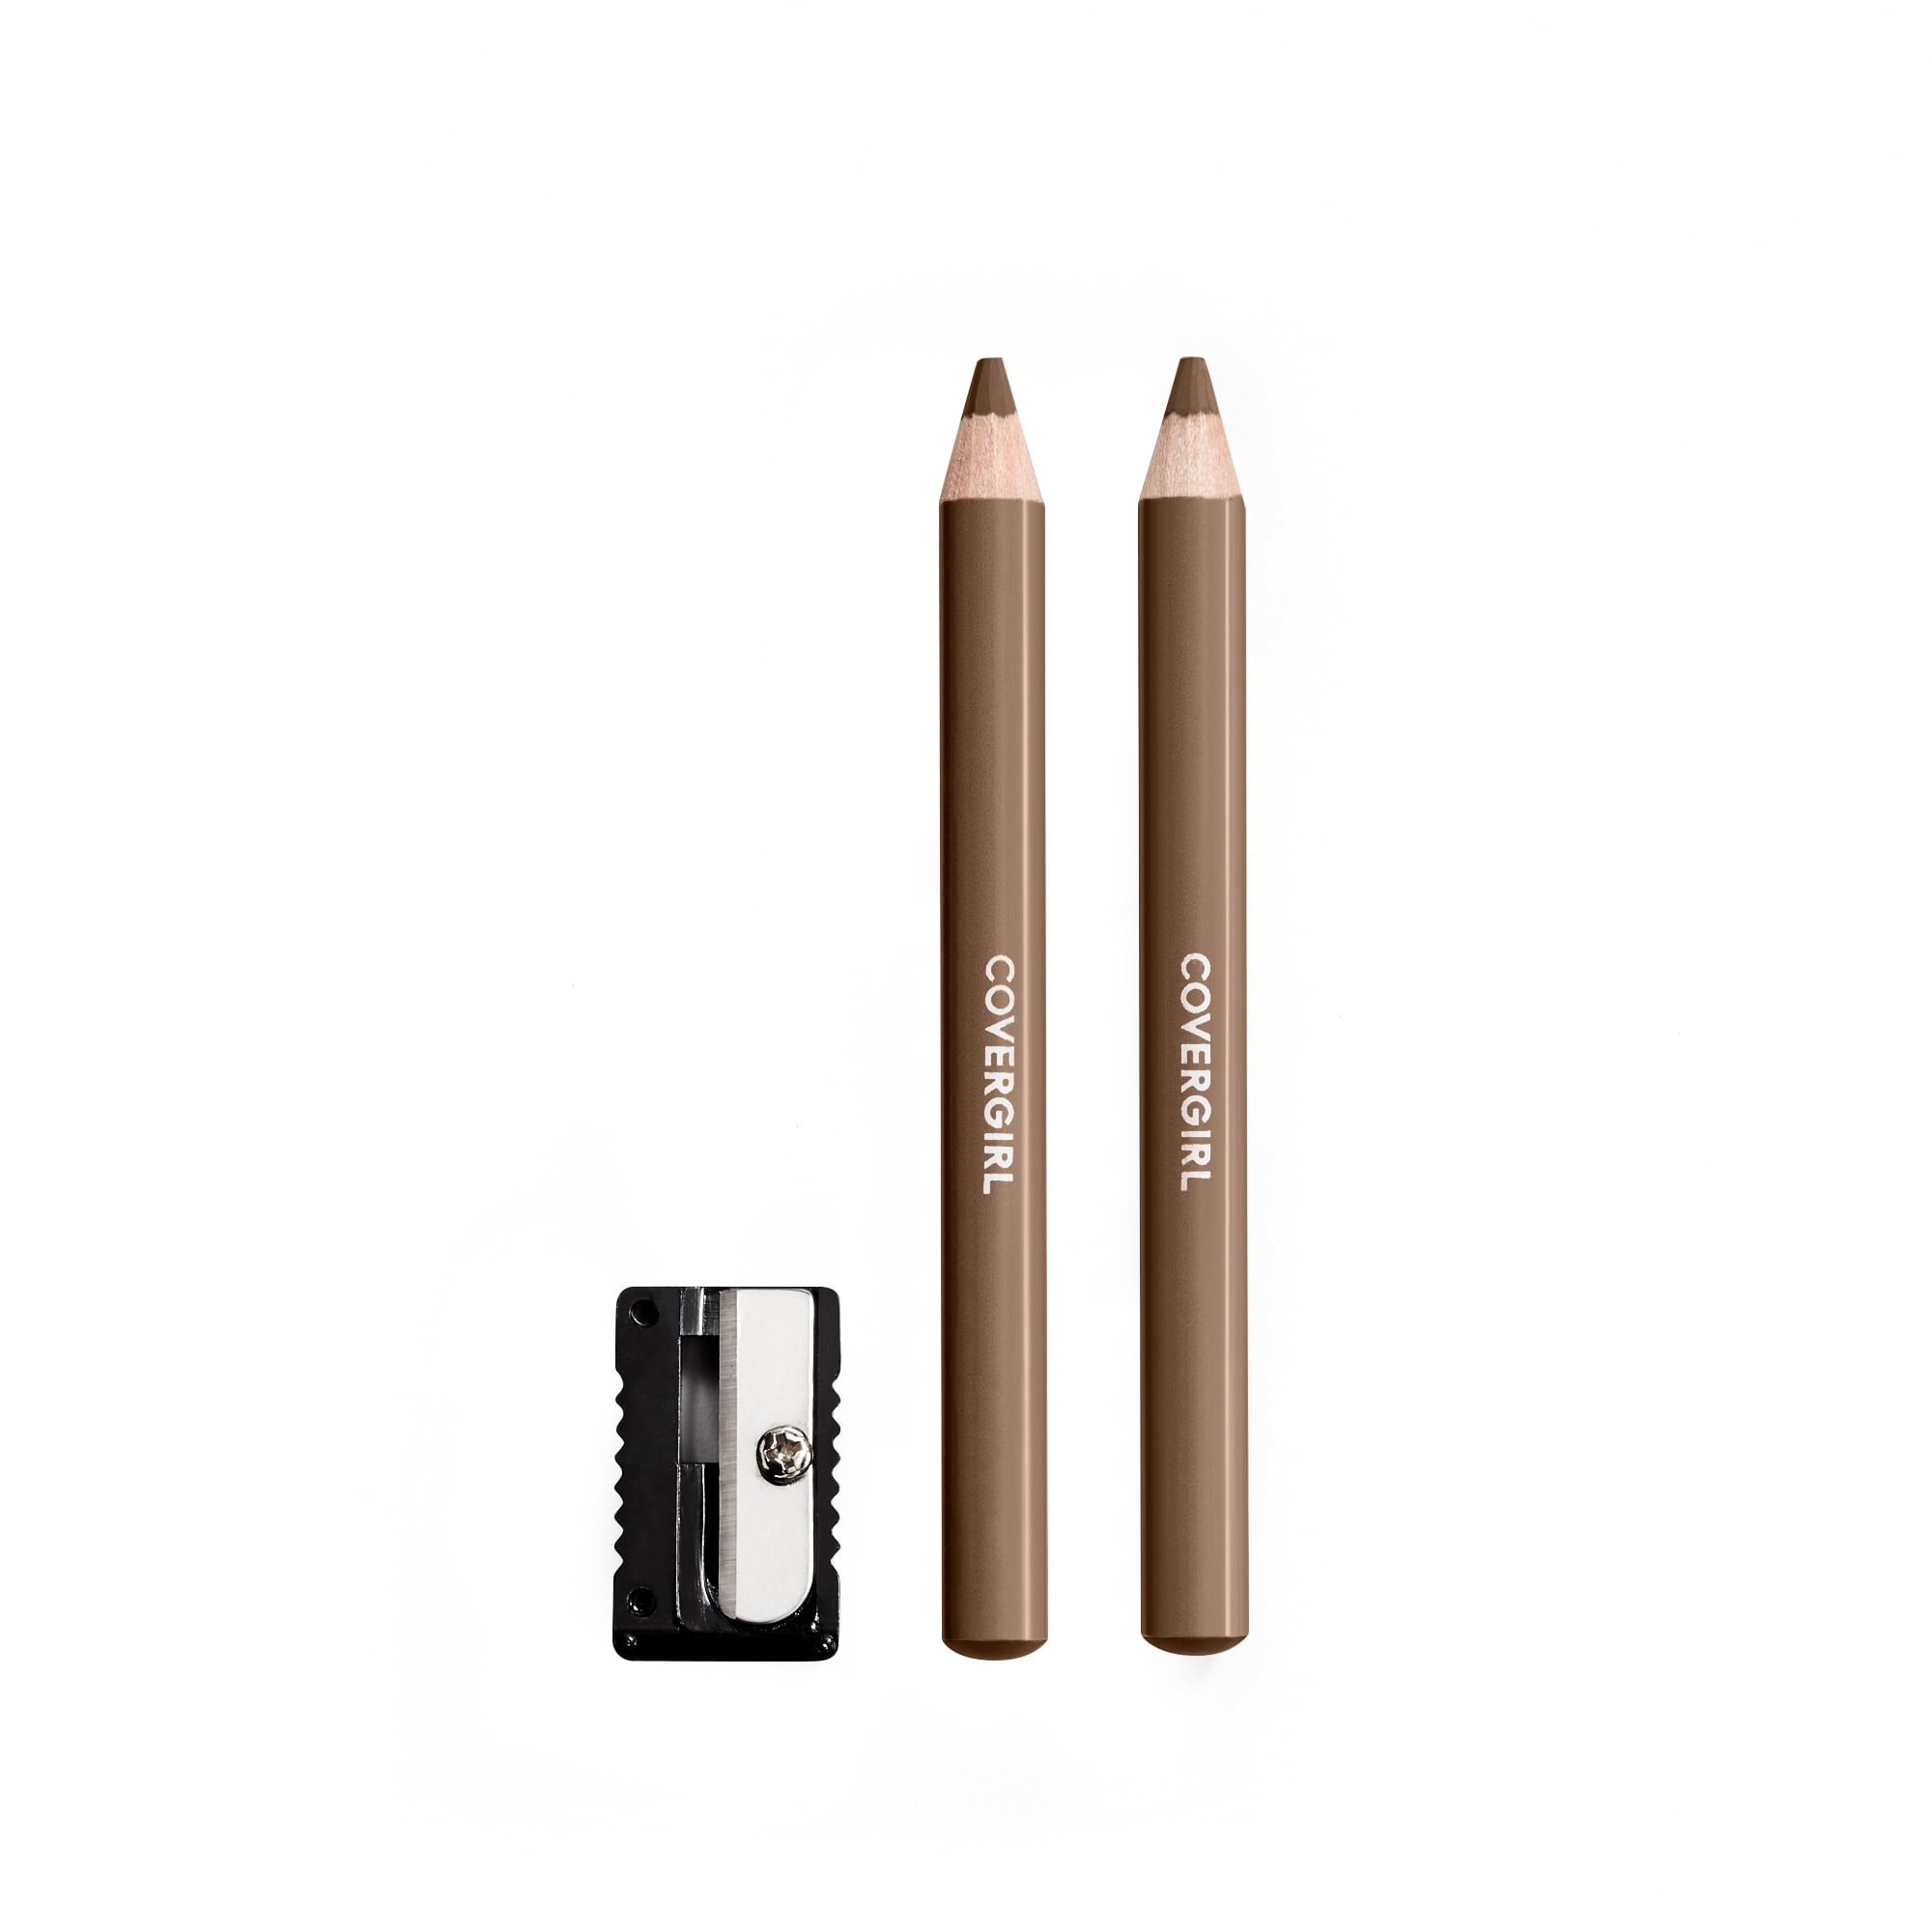 COVERGIRL Eyebrow & Eyemakers Water Resistant Pencil Soft Brown 510, .06 oz  